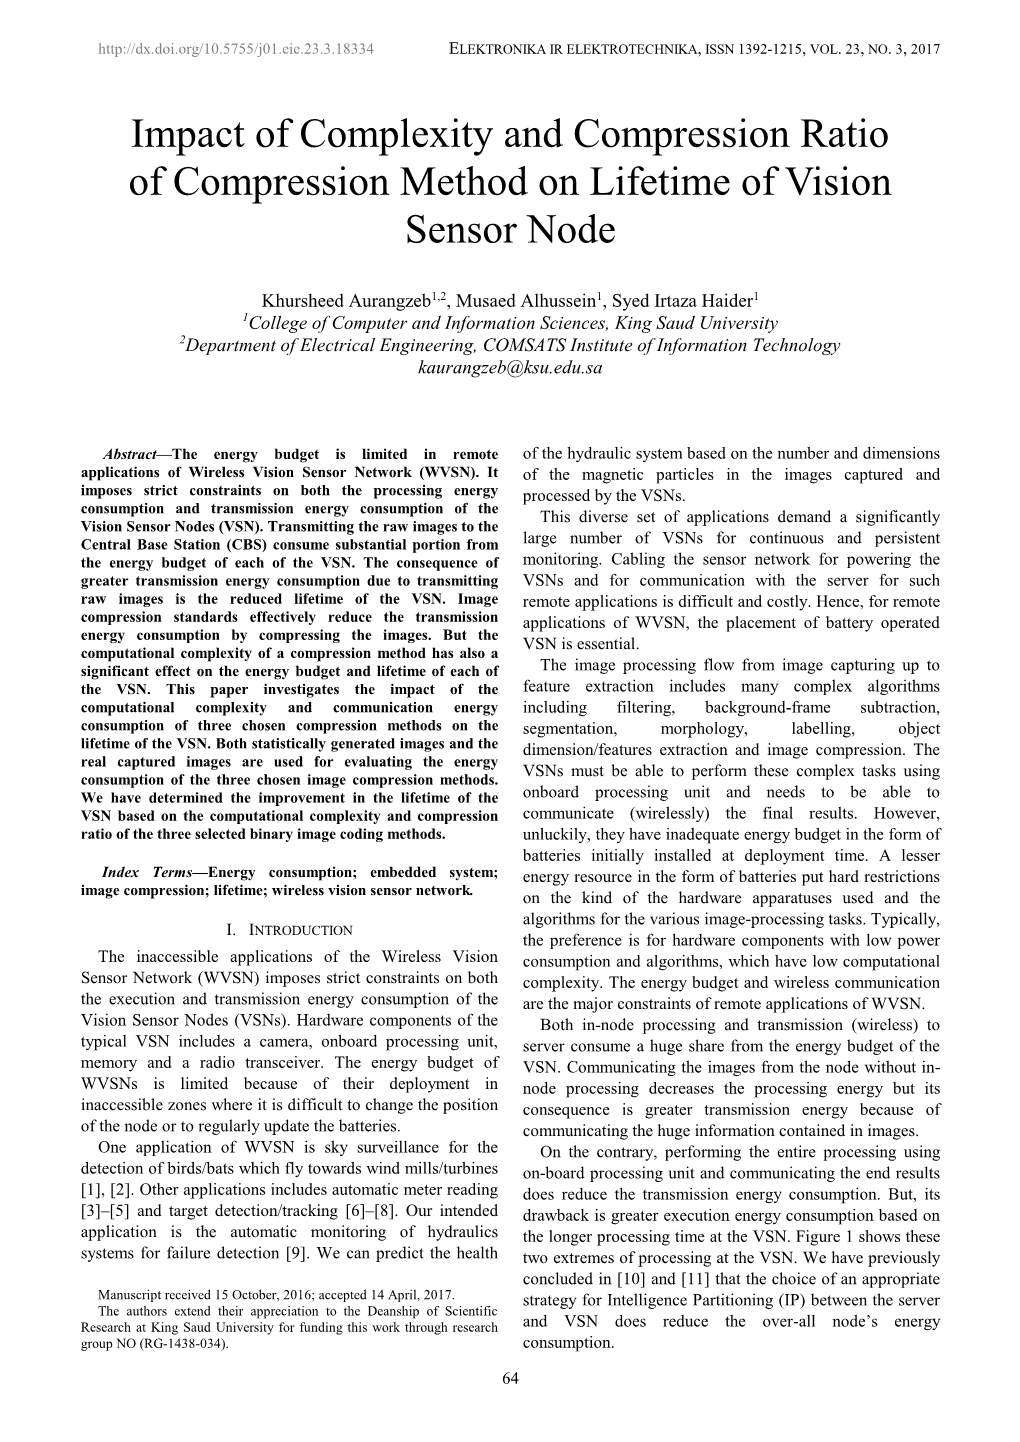 Impact of Complexity and Compression Ratio of Compression Method on Lifetime of Vision Sensor Node